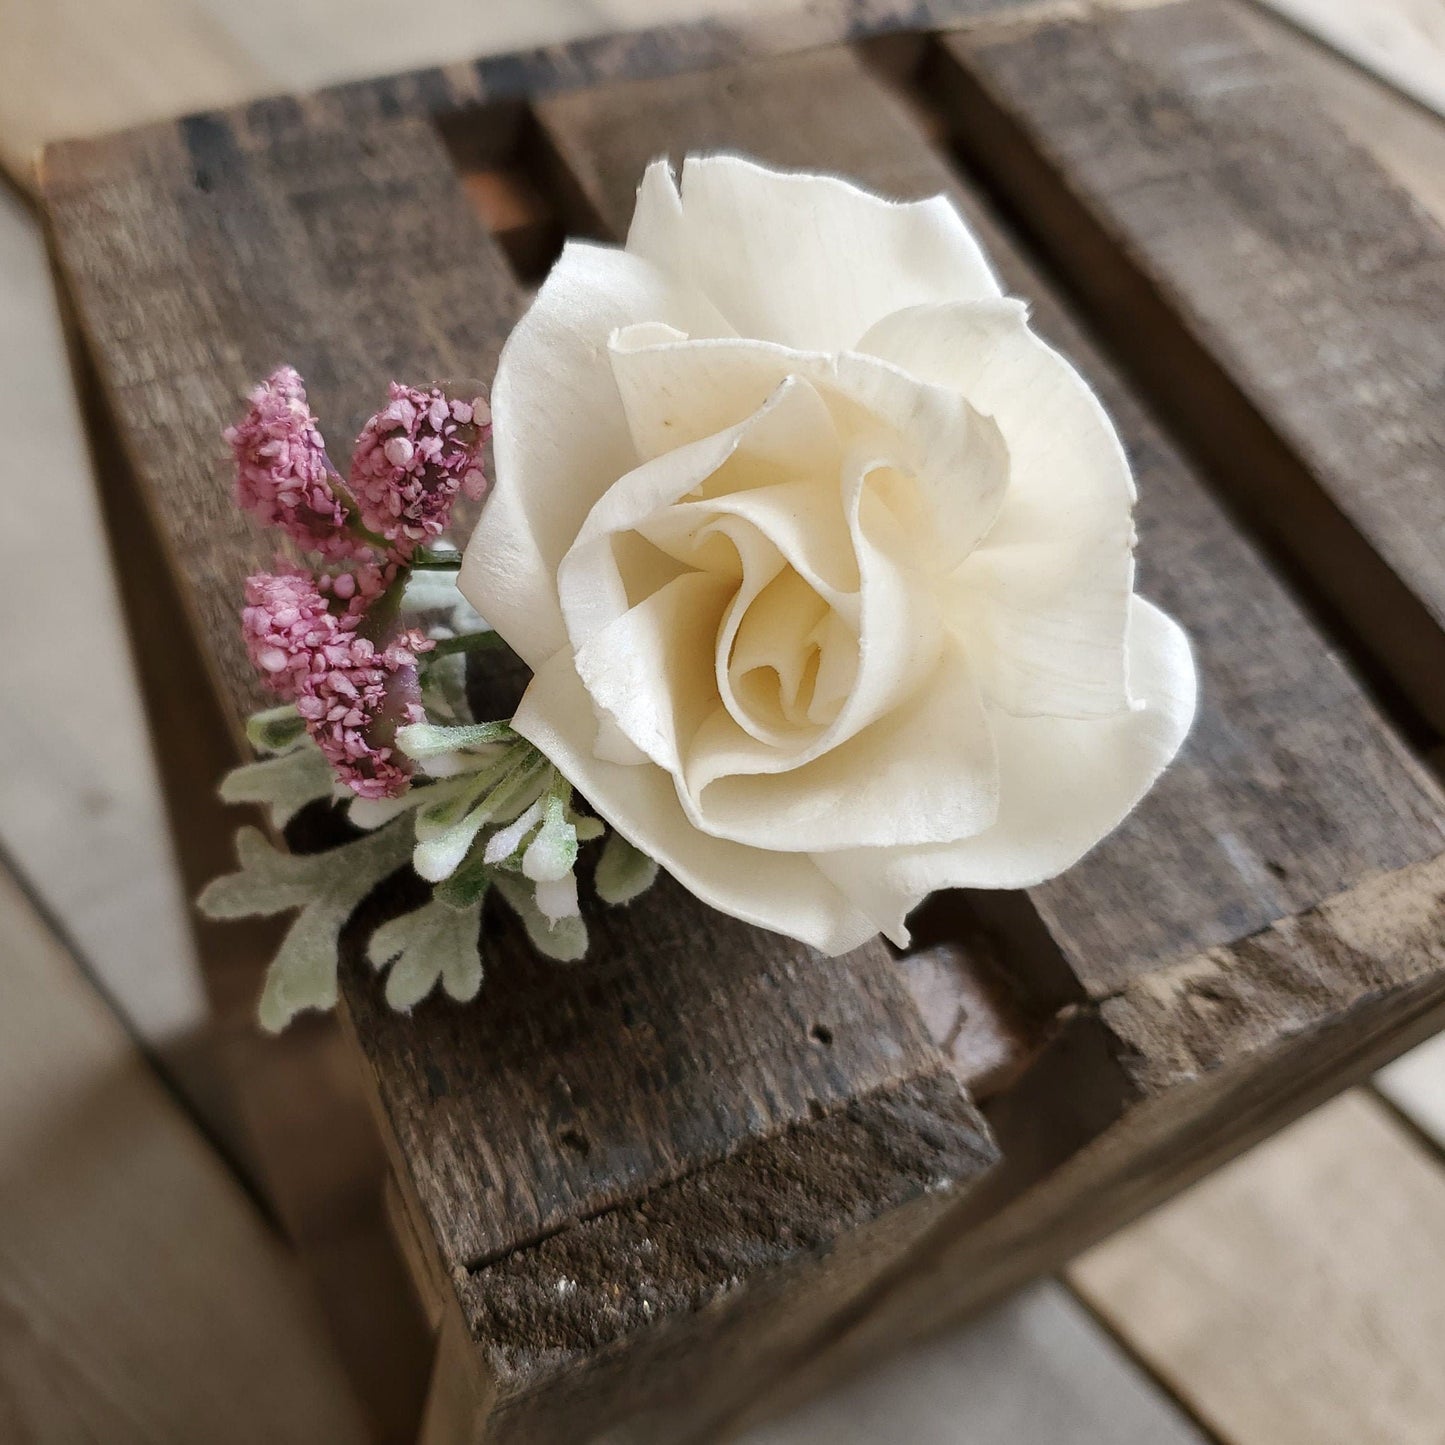 Corsage and Boutonniere Set with Wood Flowers, Wedding Flowers, Bridal Wrist Corsage, Wooden Corsage Set